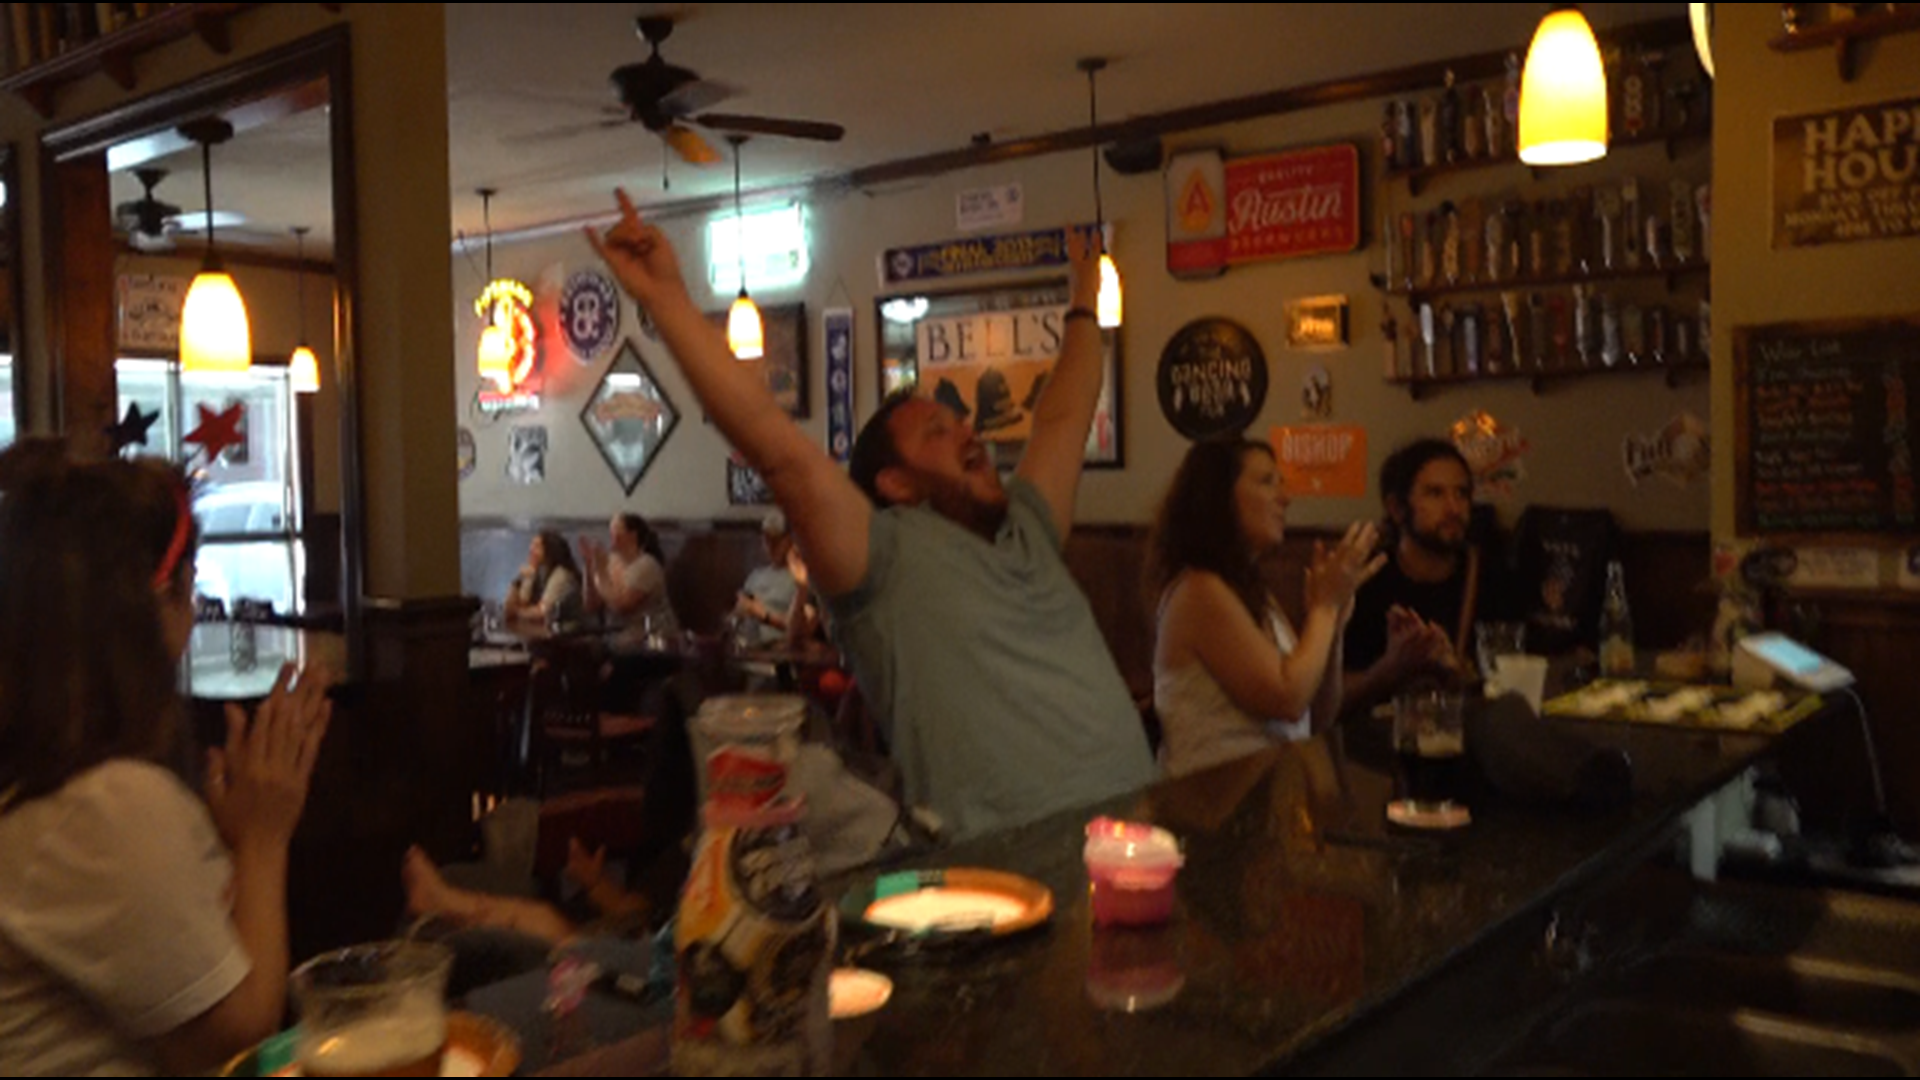 People across Texas, and the world, came together to watch the U.S. Women’s National Team take on the Netherlands. A Waco pub opened early for the match.